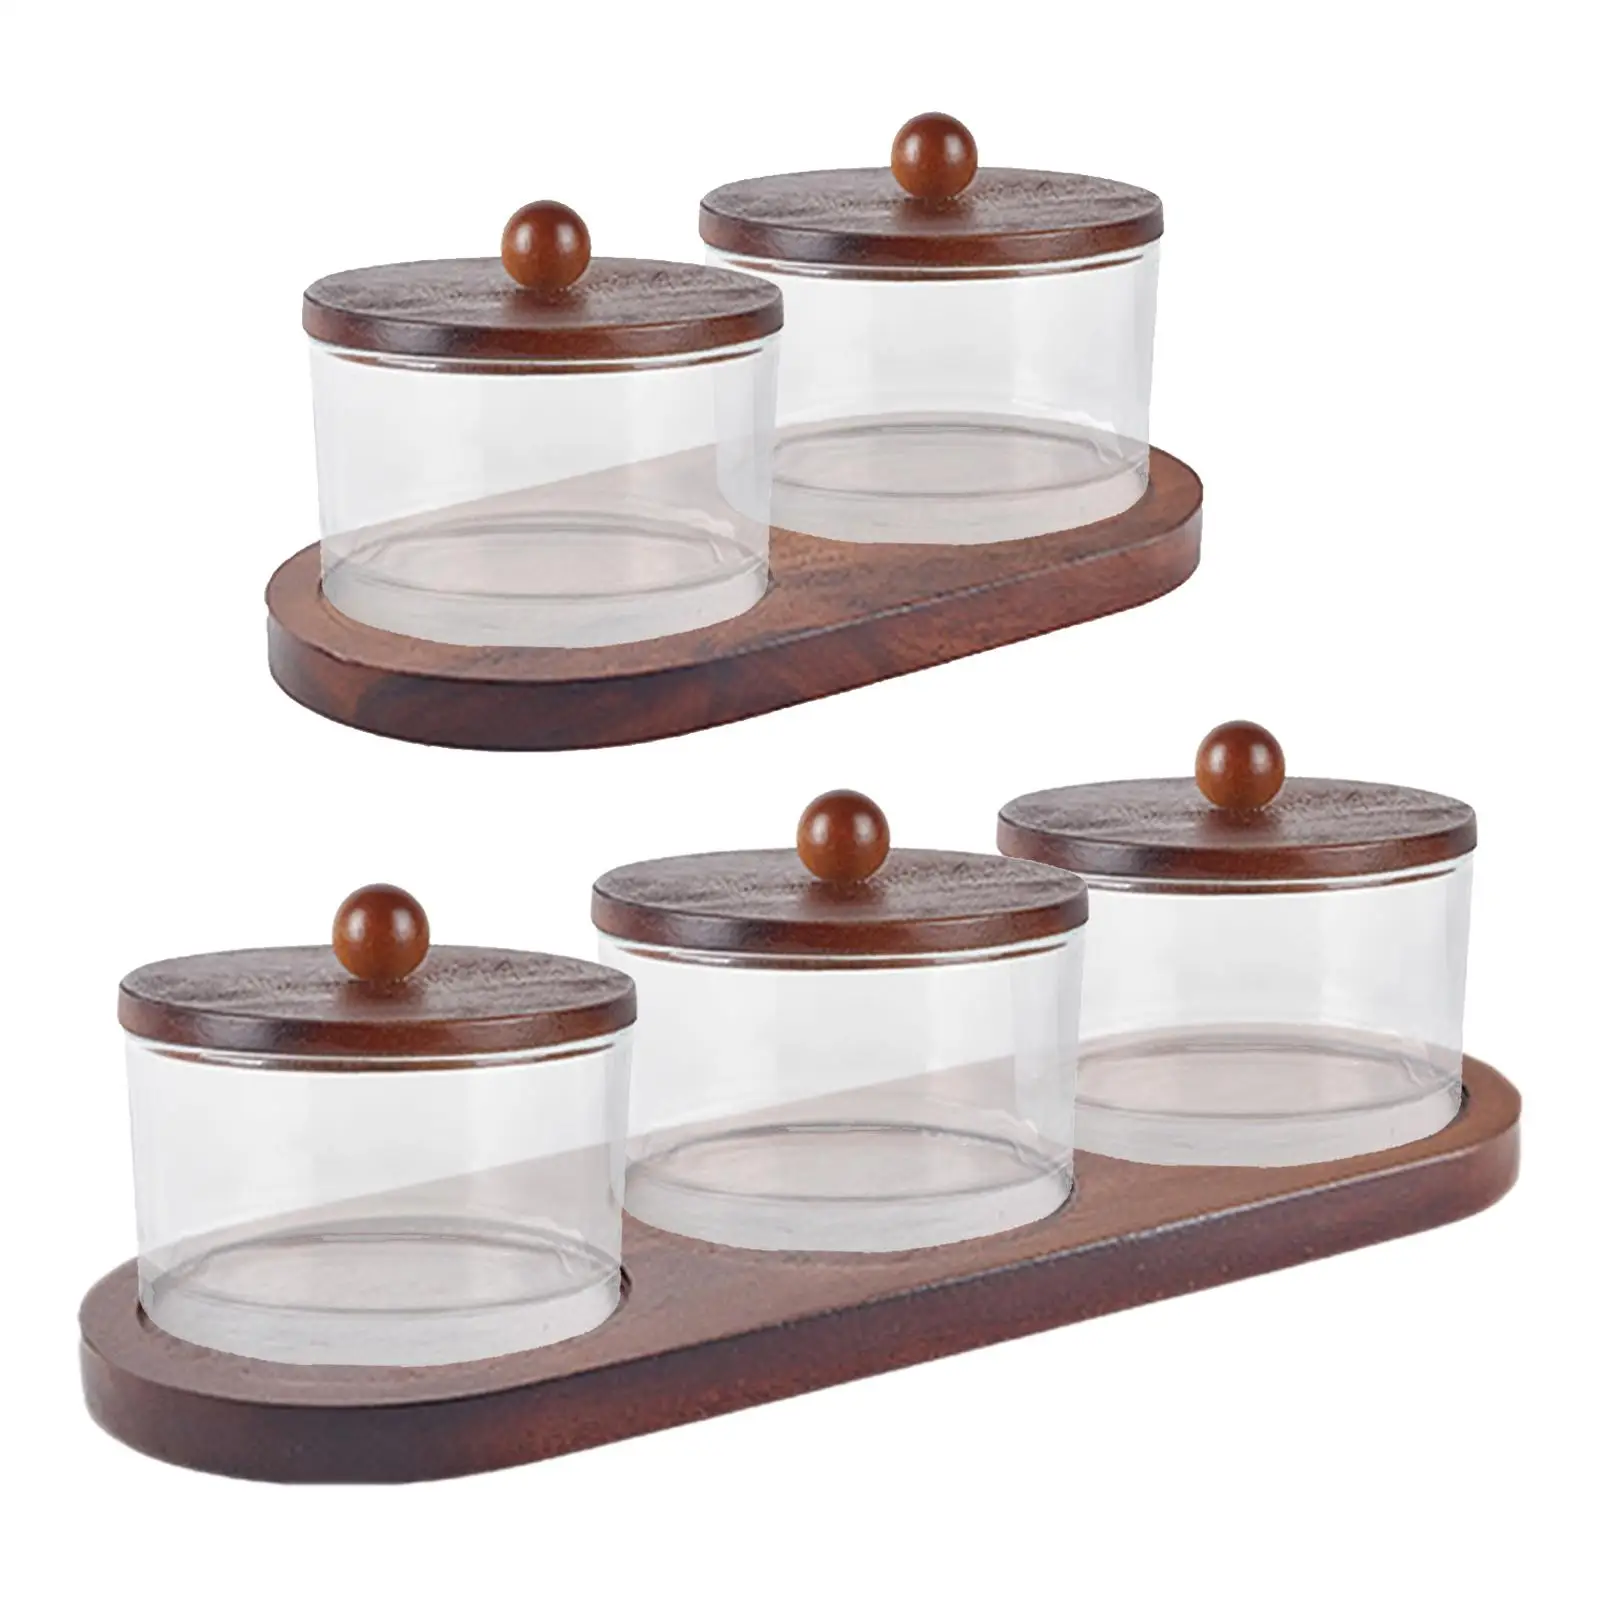 Bowl with Wooden Serving Tray Wooden Pallets with Lid Gift Transparent Wooden Serving Tray with Bowl for Appetizers Sala Fruit